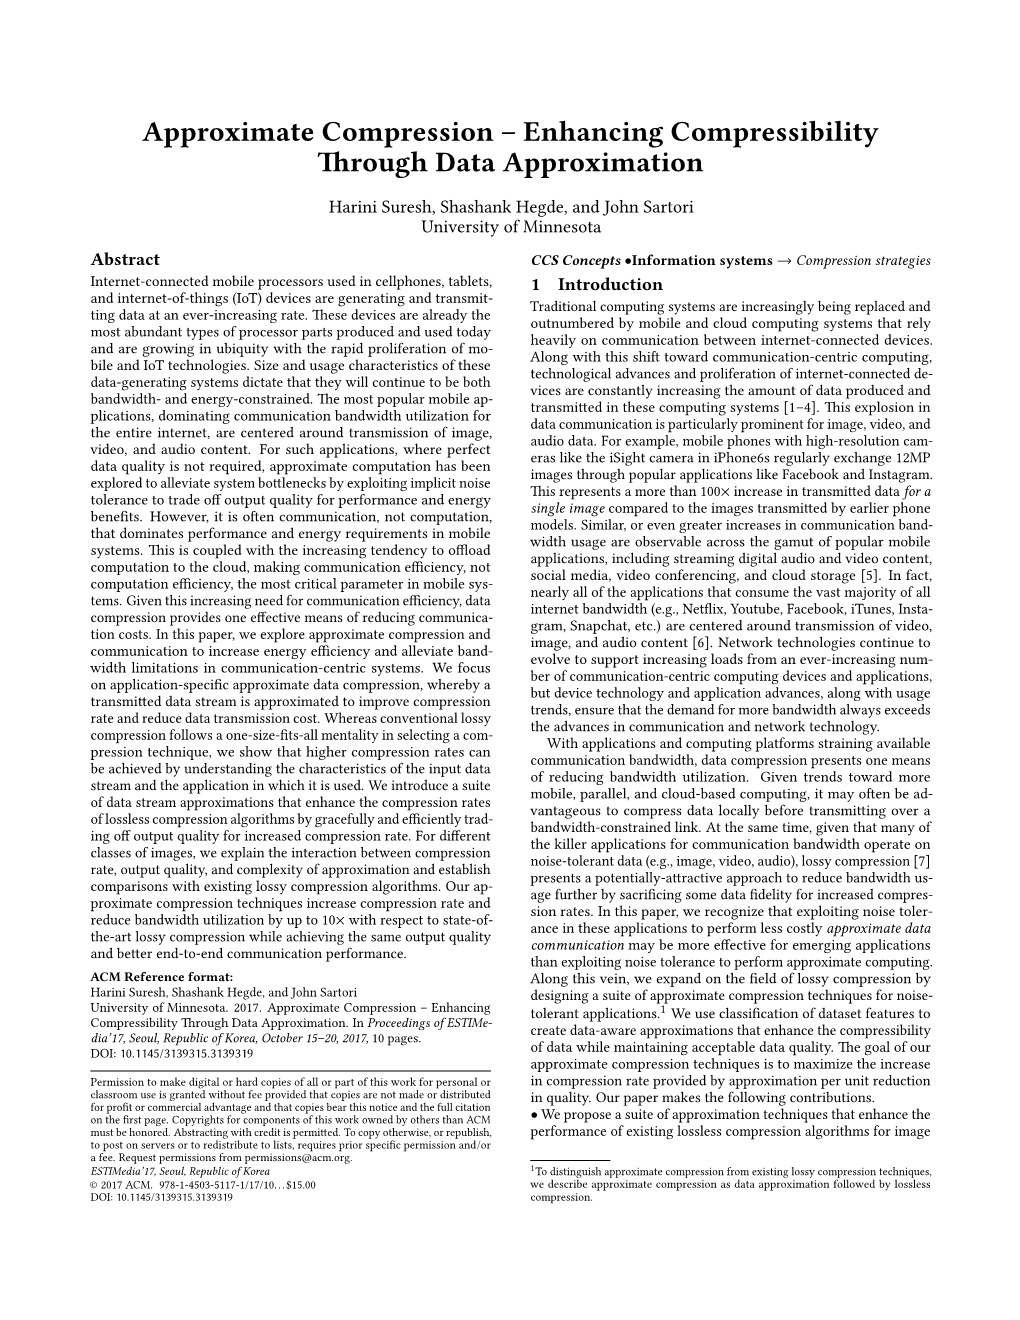 Enhancing Compressibility Through Data Approximation